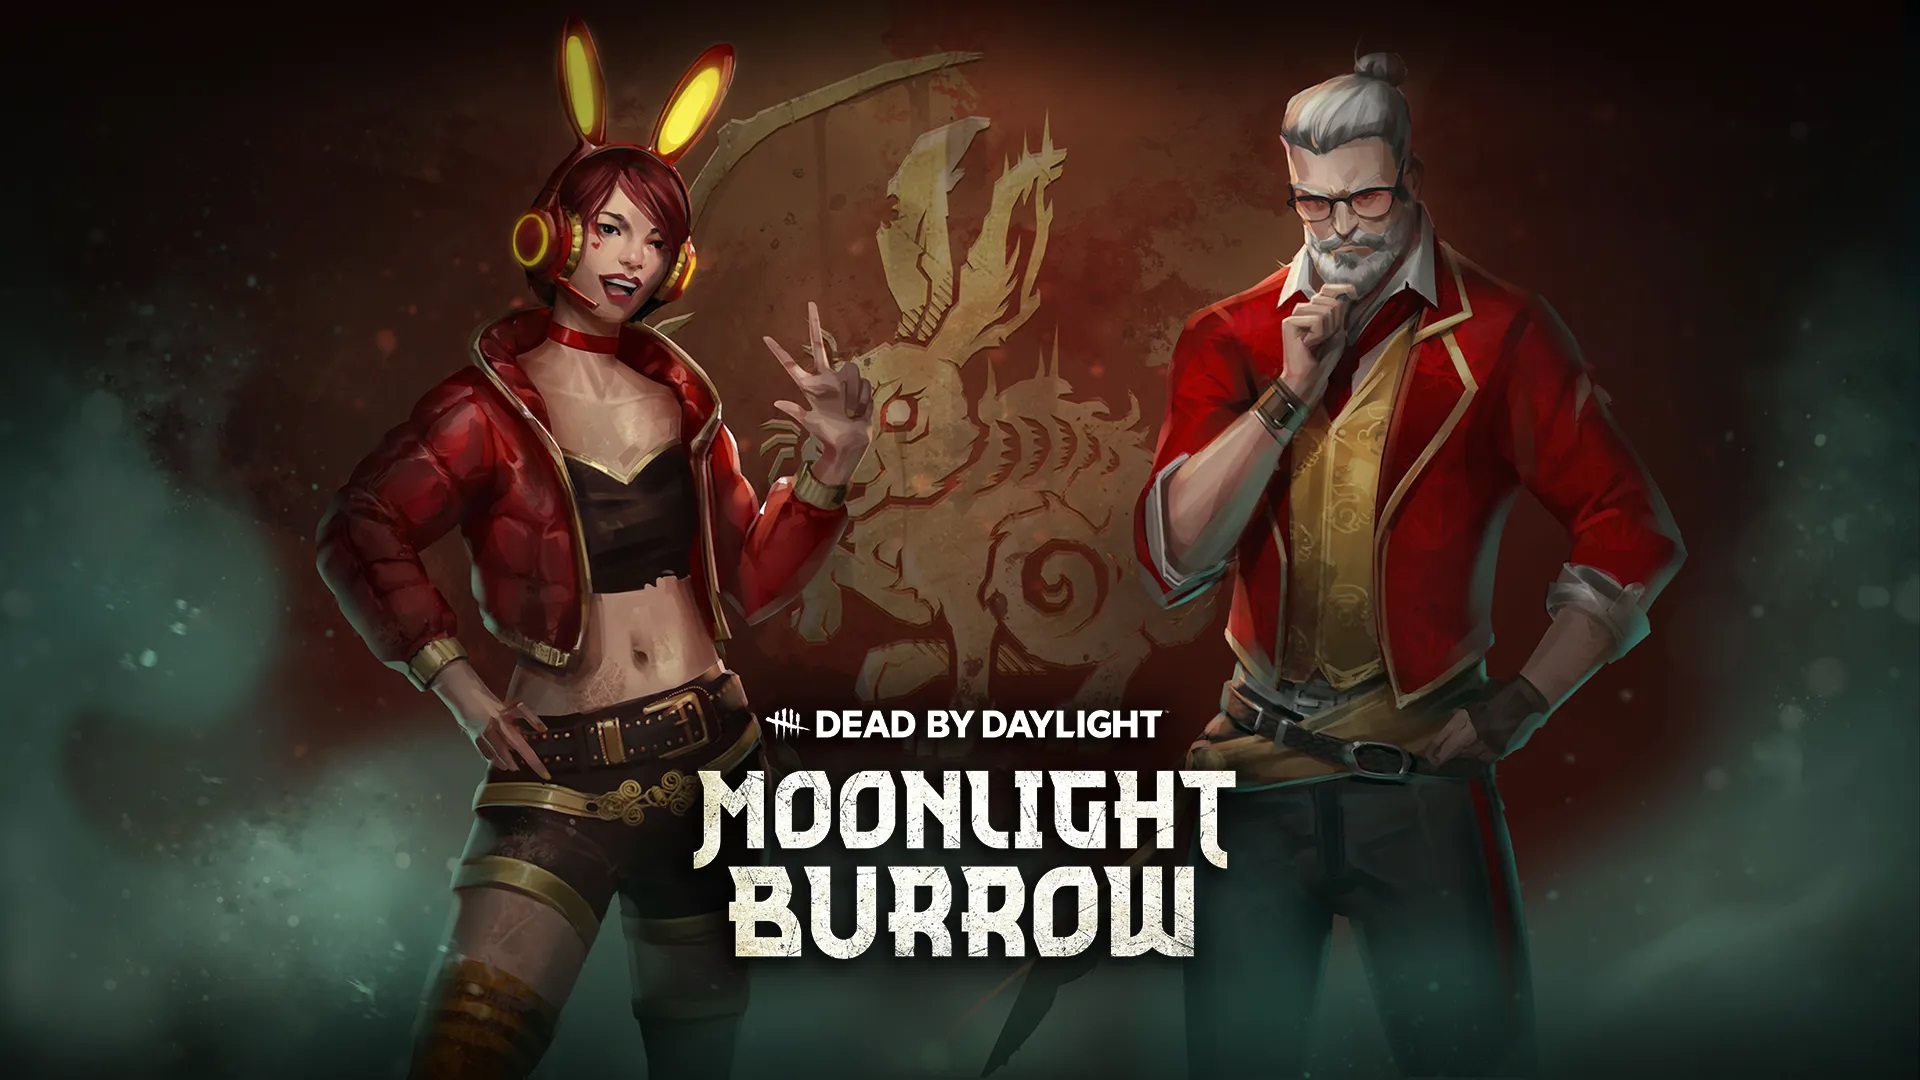 Dead by Daylight launches Moonlight Burrow event for Lunar New Year